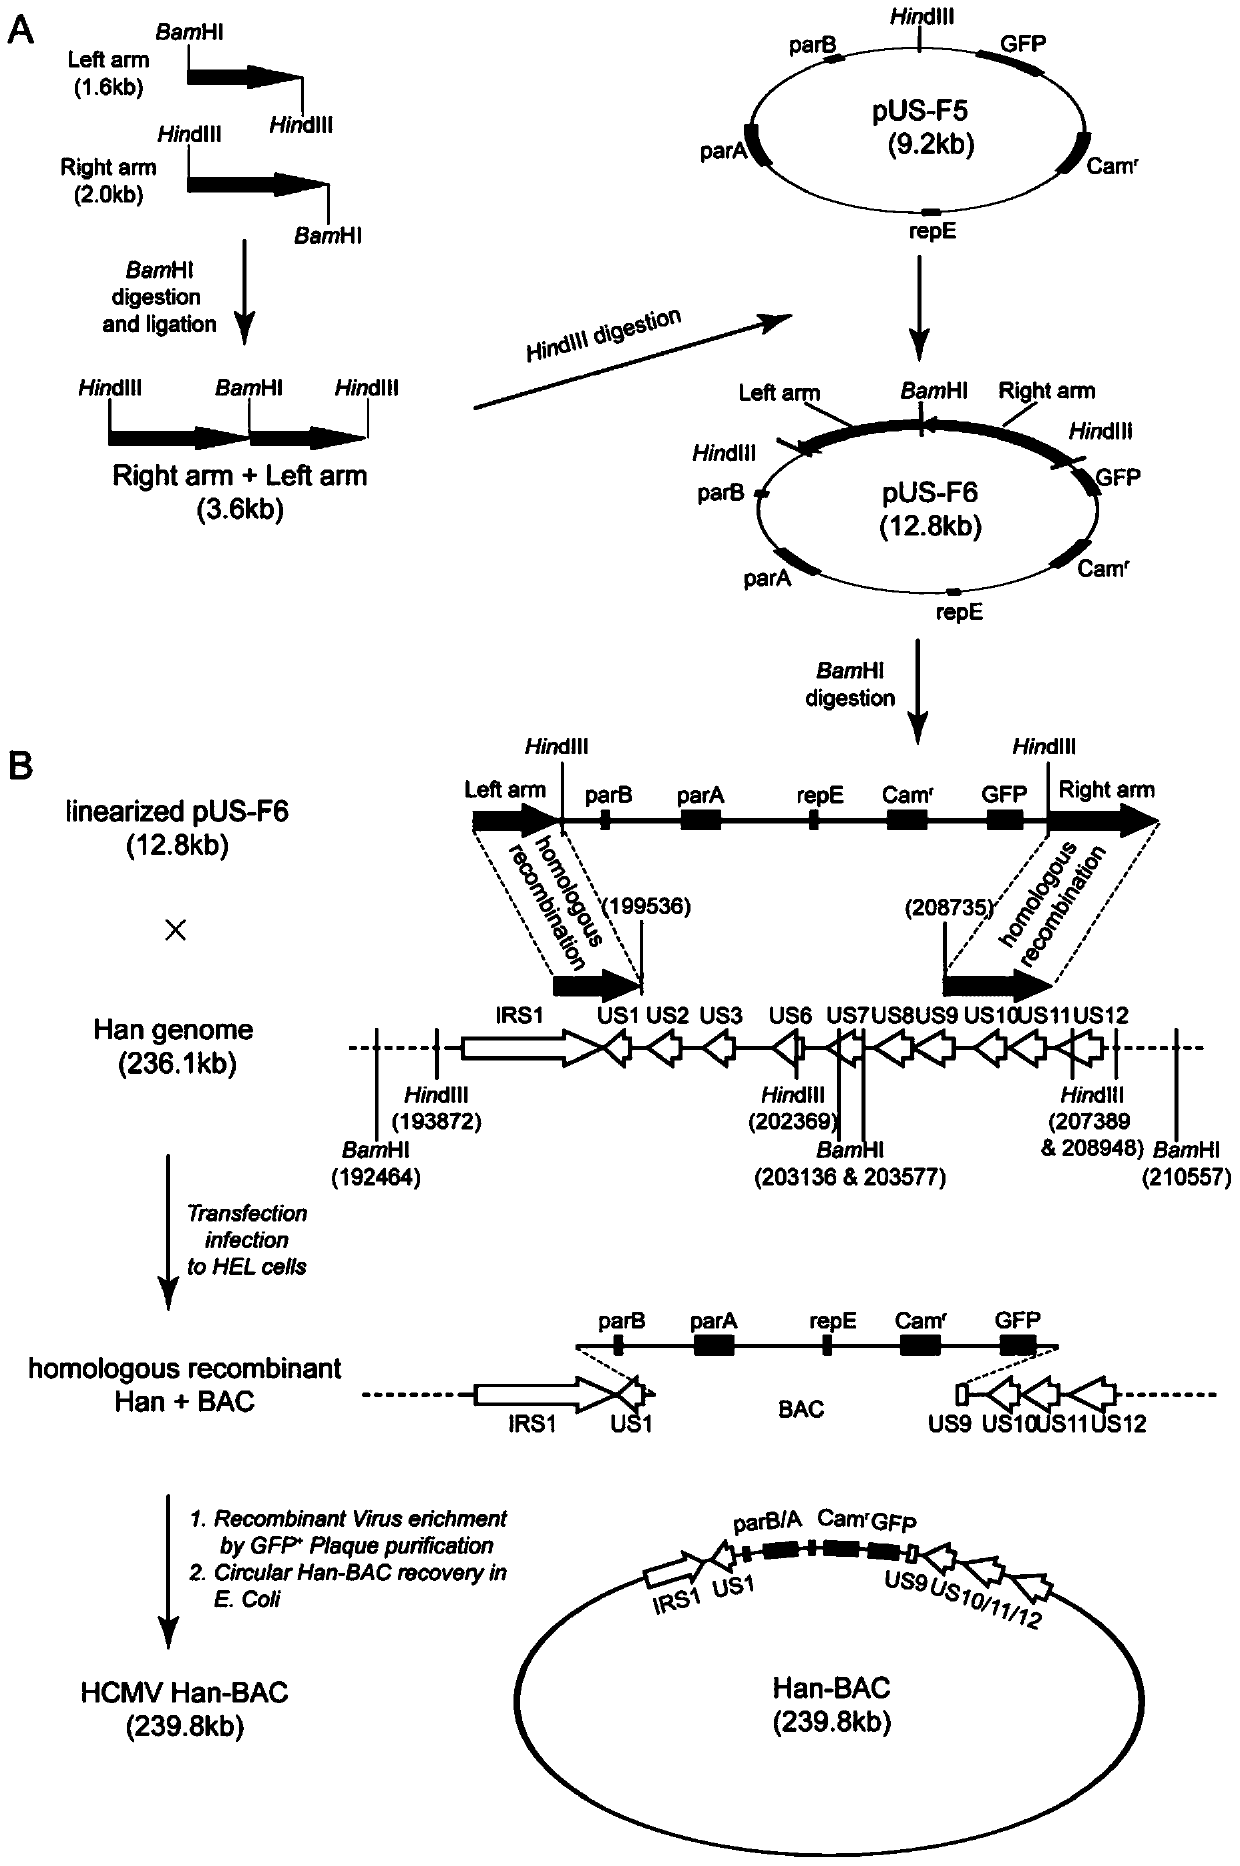 Infectious clone of human cytomegalovirus and its construction method and application